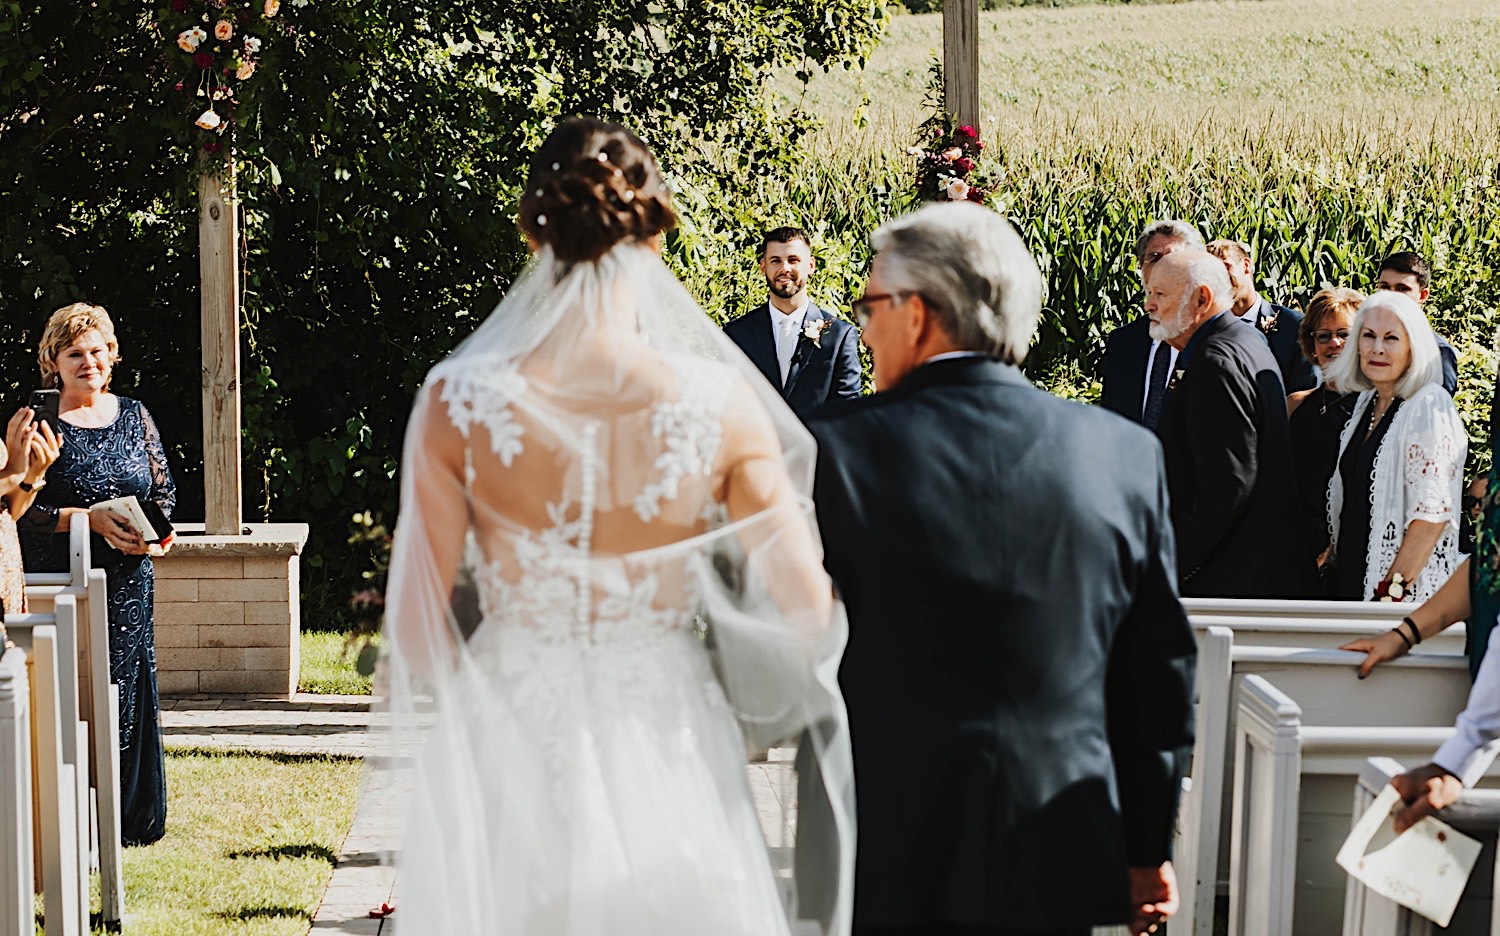 A groom smiles in the background as the bride and her father walk down the aisle together in the foreground of the photo during the outdoor wedding ceremony at Legacy Hill Farm